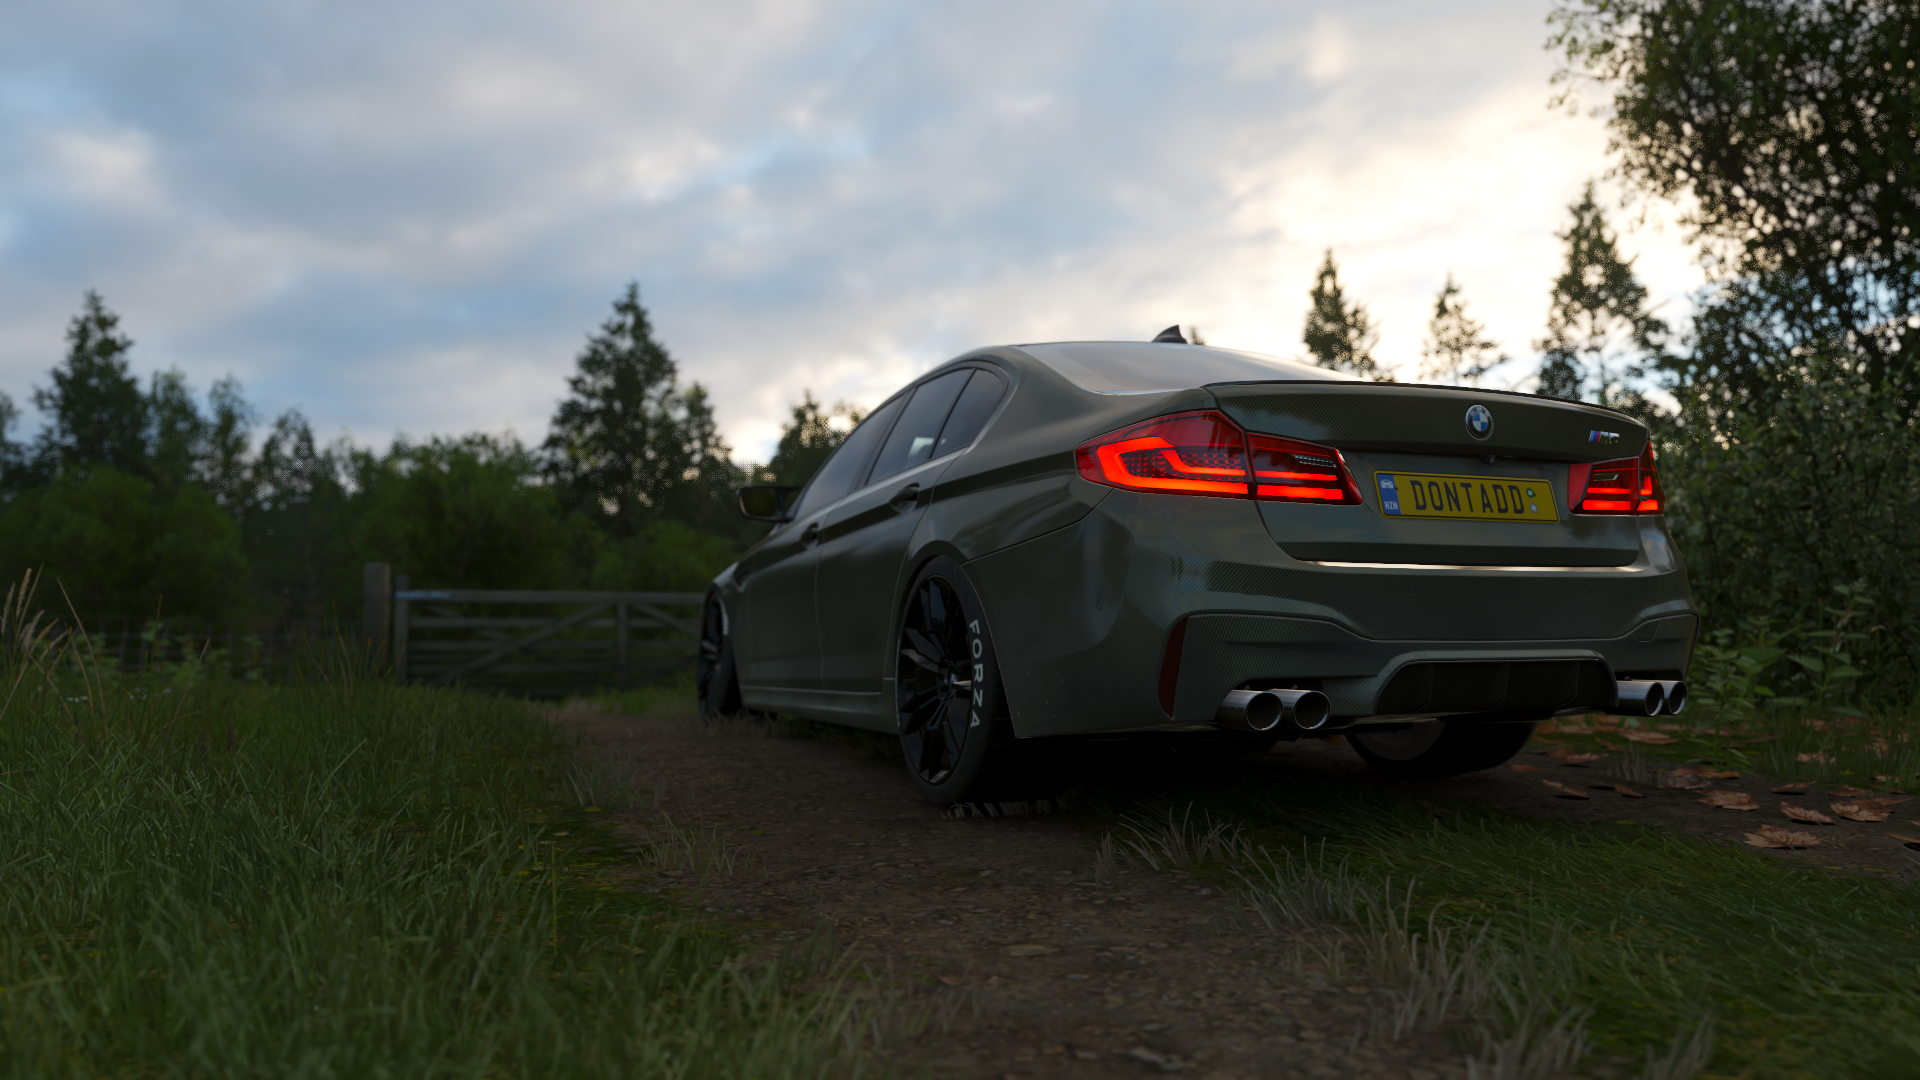 BMW M5 by DontAddmE_E92